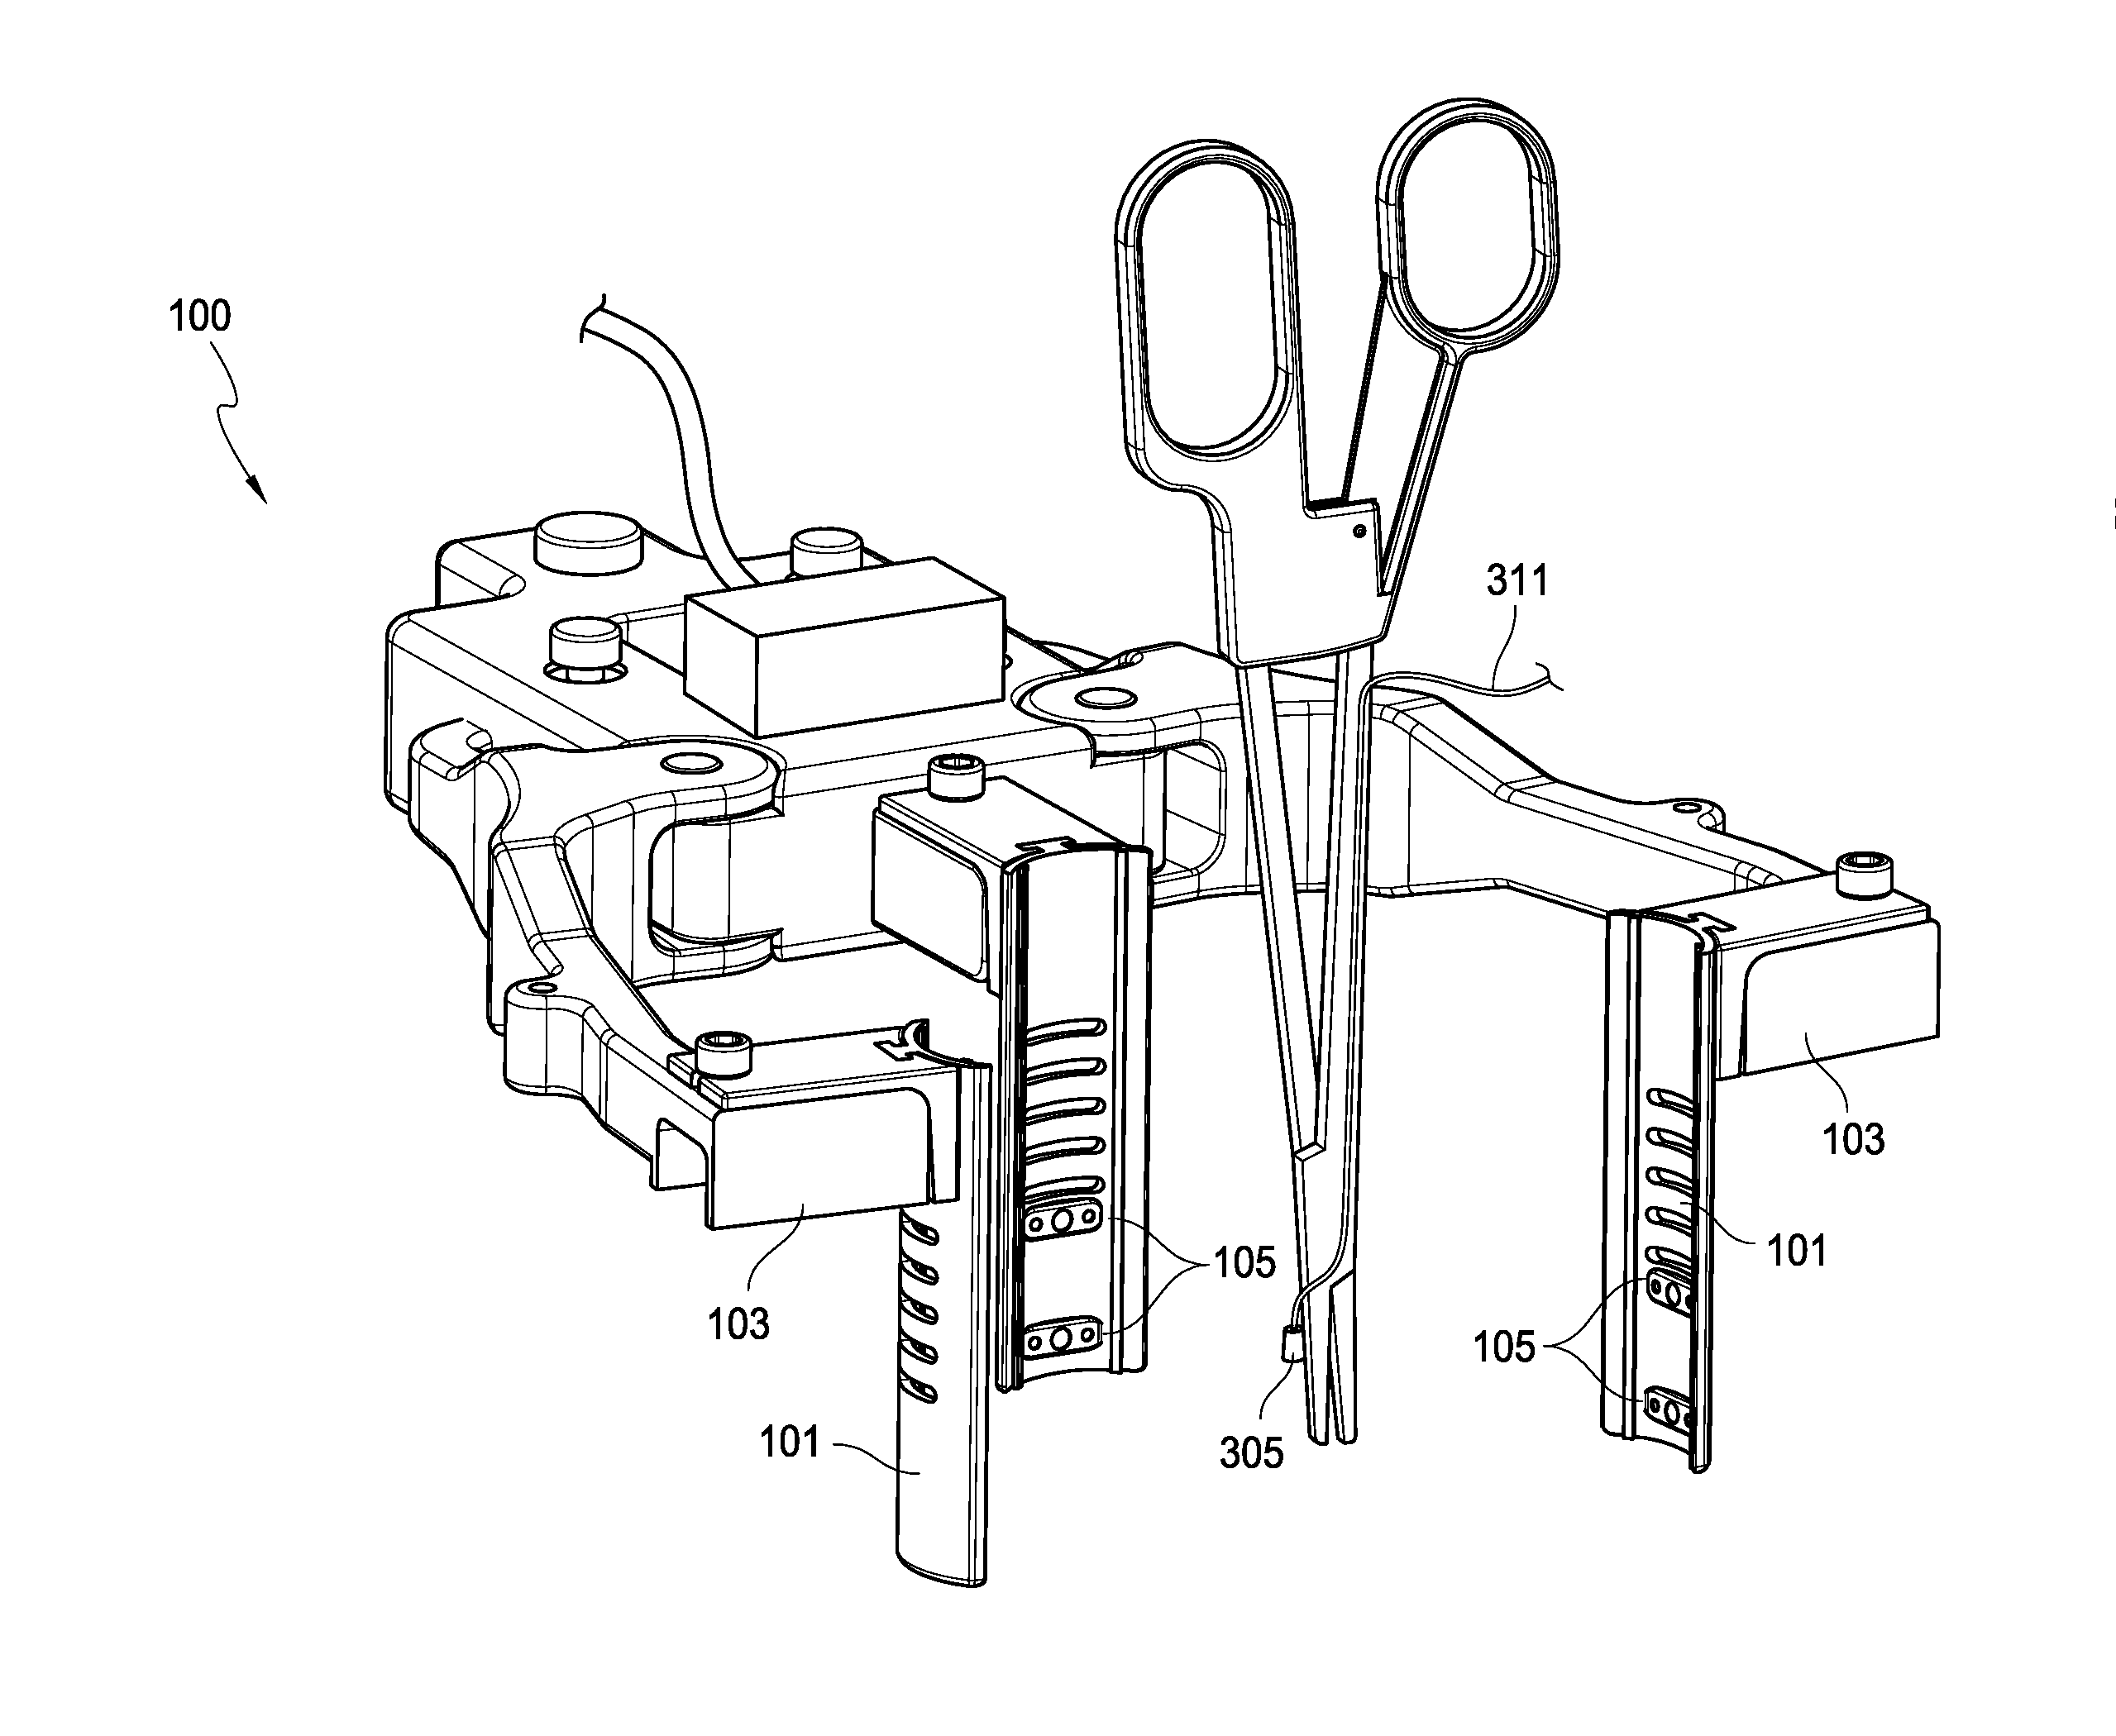 Surgical visualization system